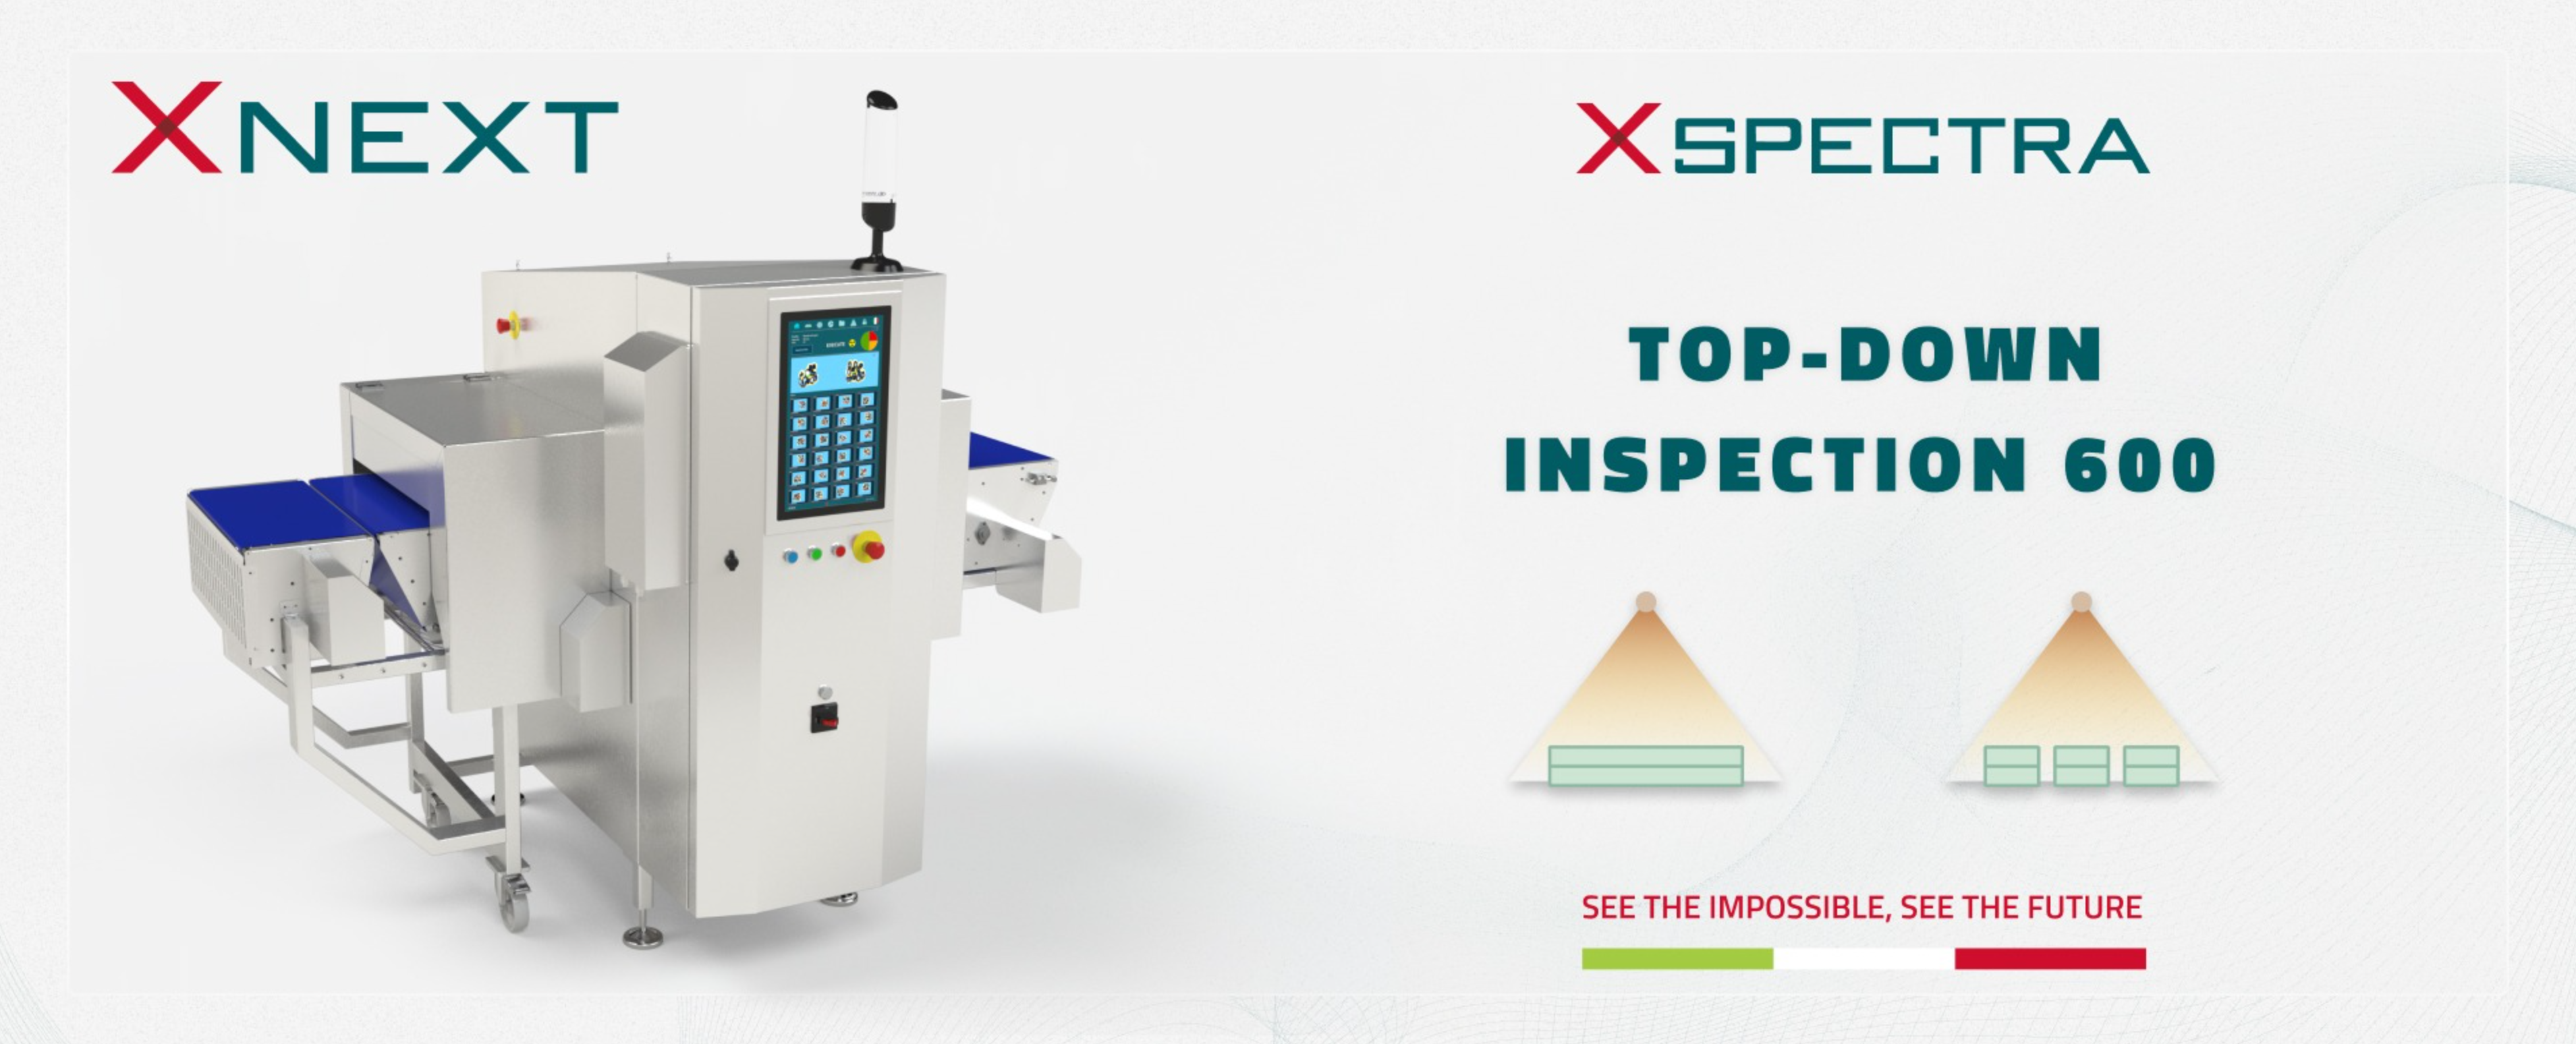 Xnext XSpectra meat inspection solution